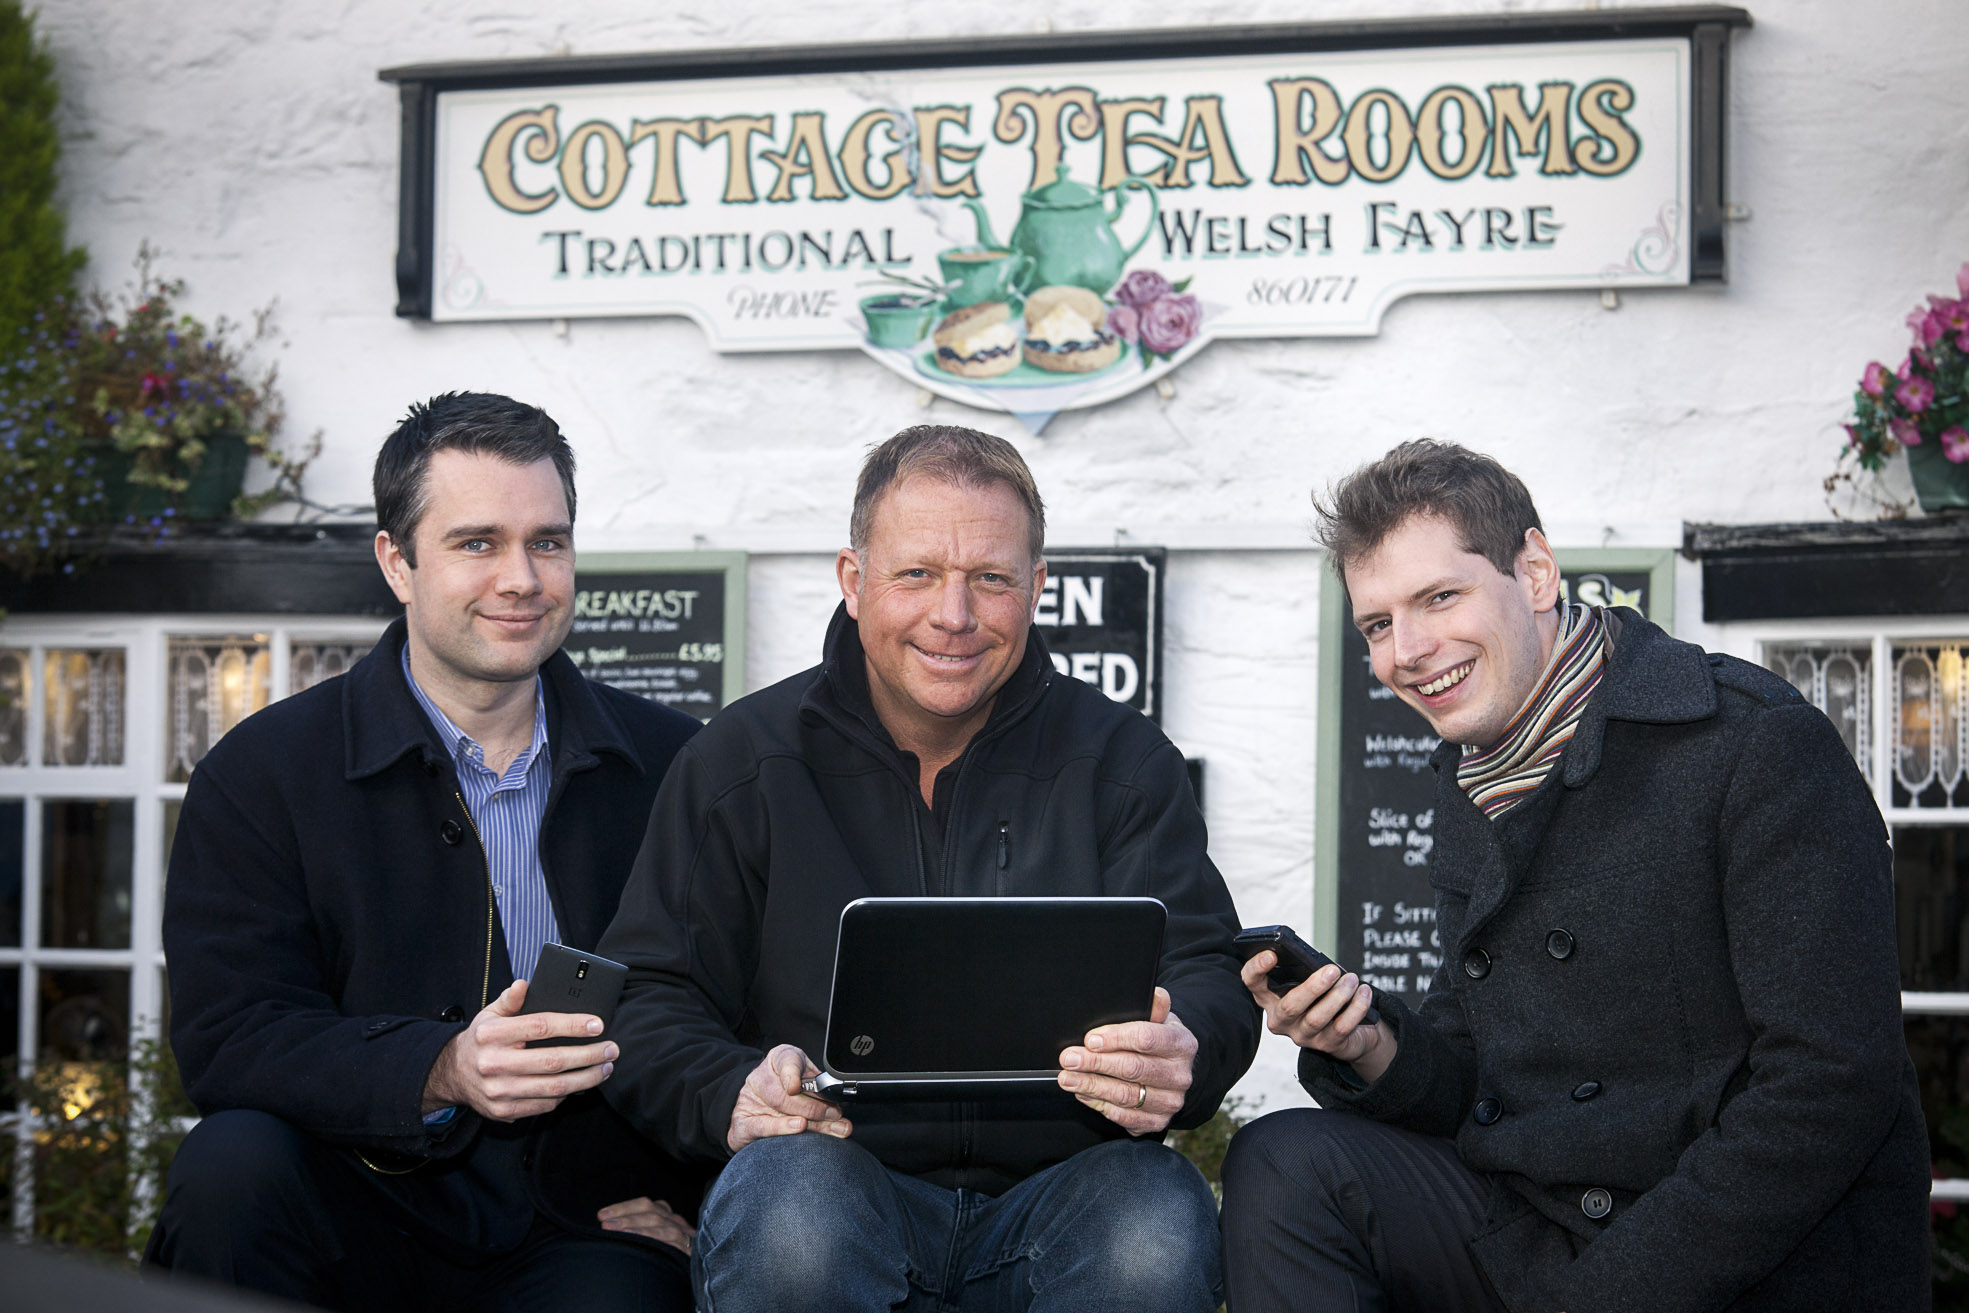 Getting switched on to the digital marketplace in North East Wales